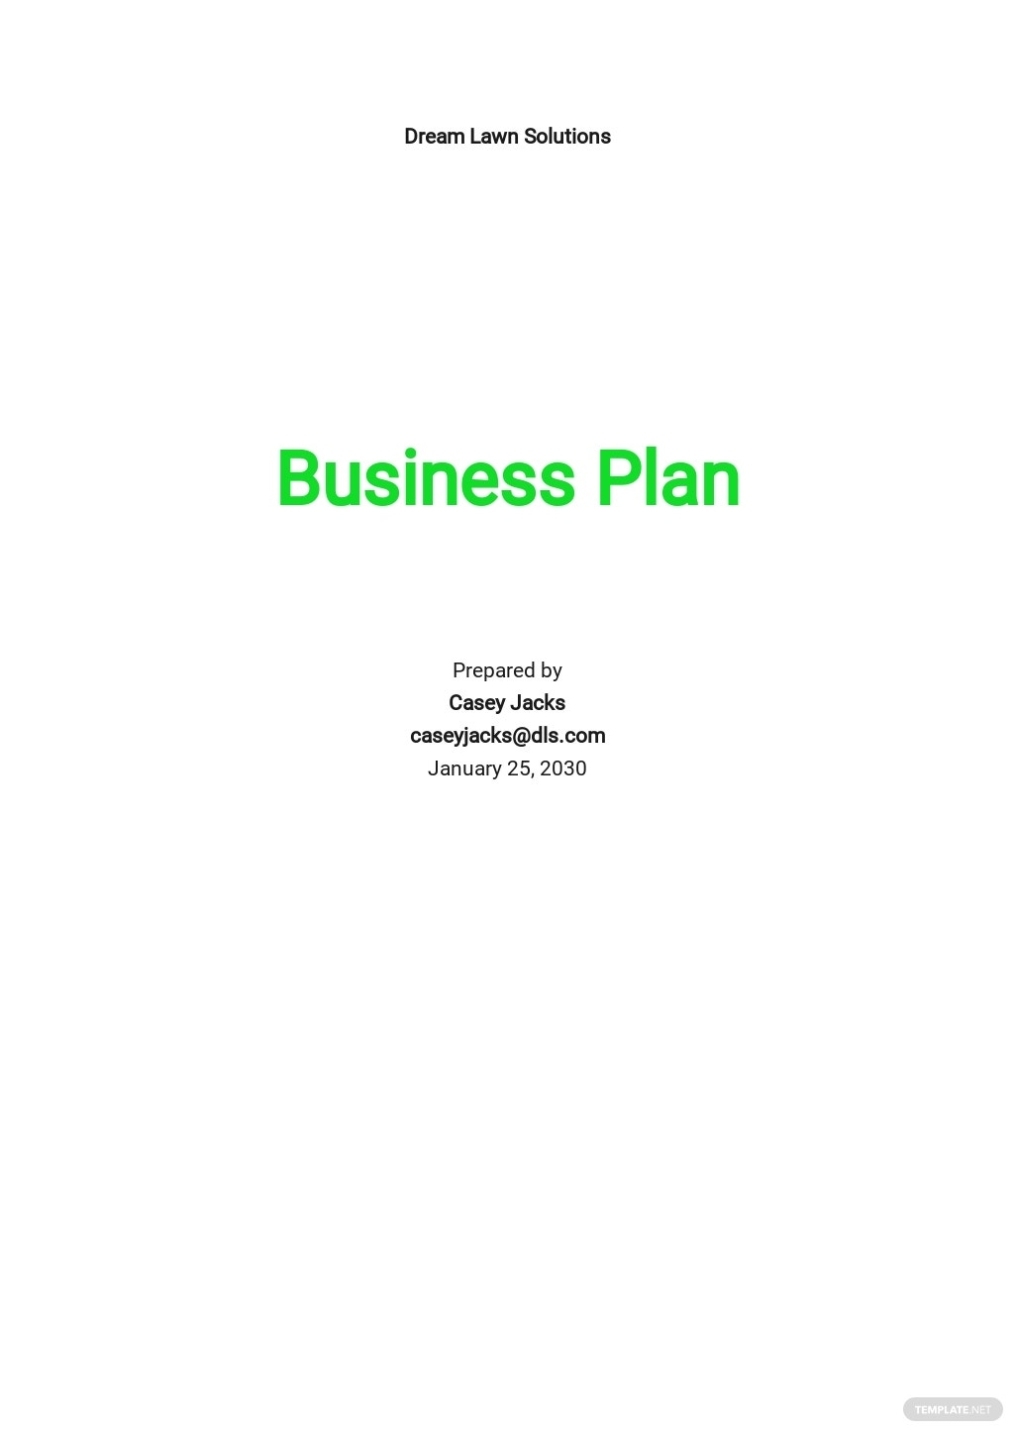 7+ Free Lawn Care Templates – Pdf | Word | Psd | Indesign | Google Docs Regarding Lawn Care Business Plan Template Free